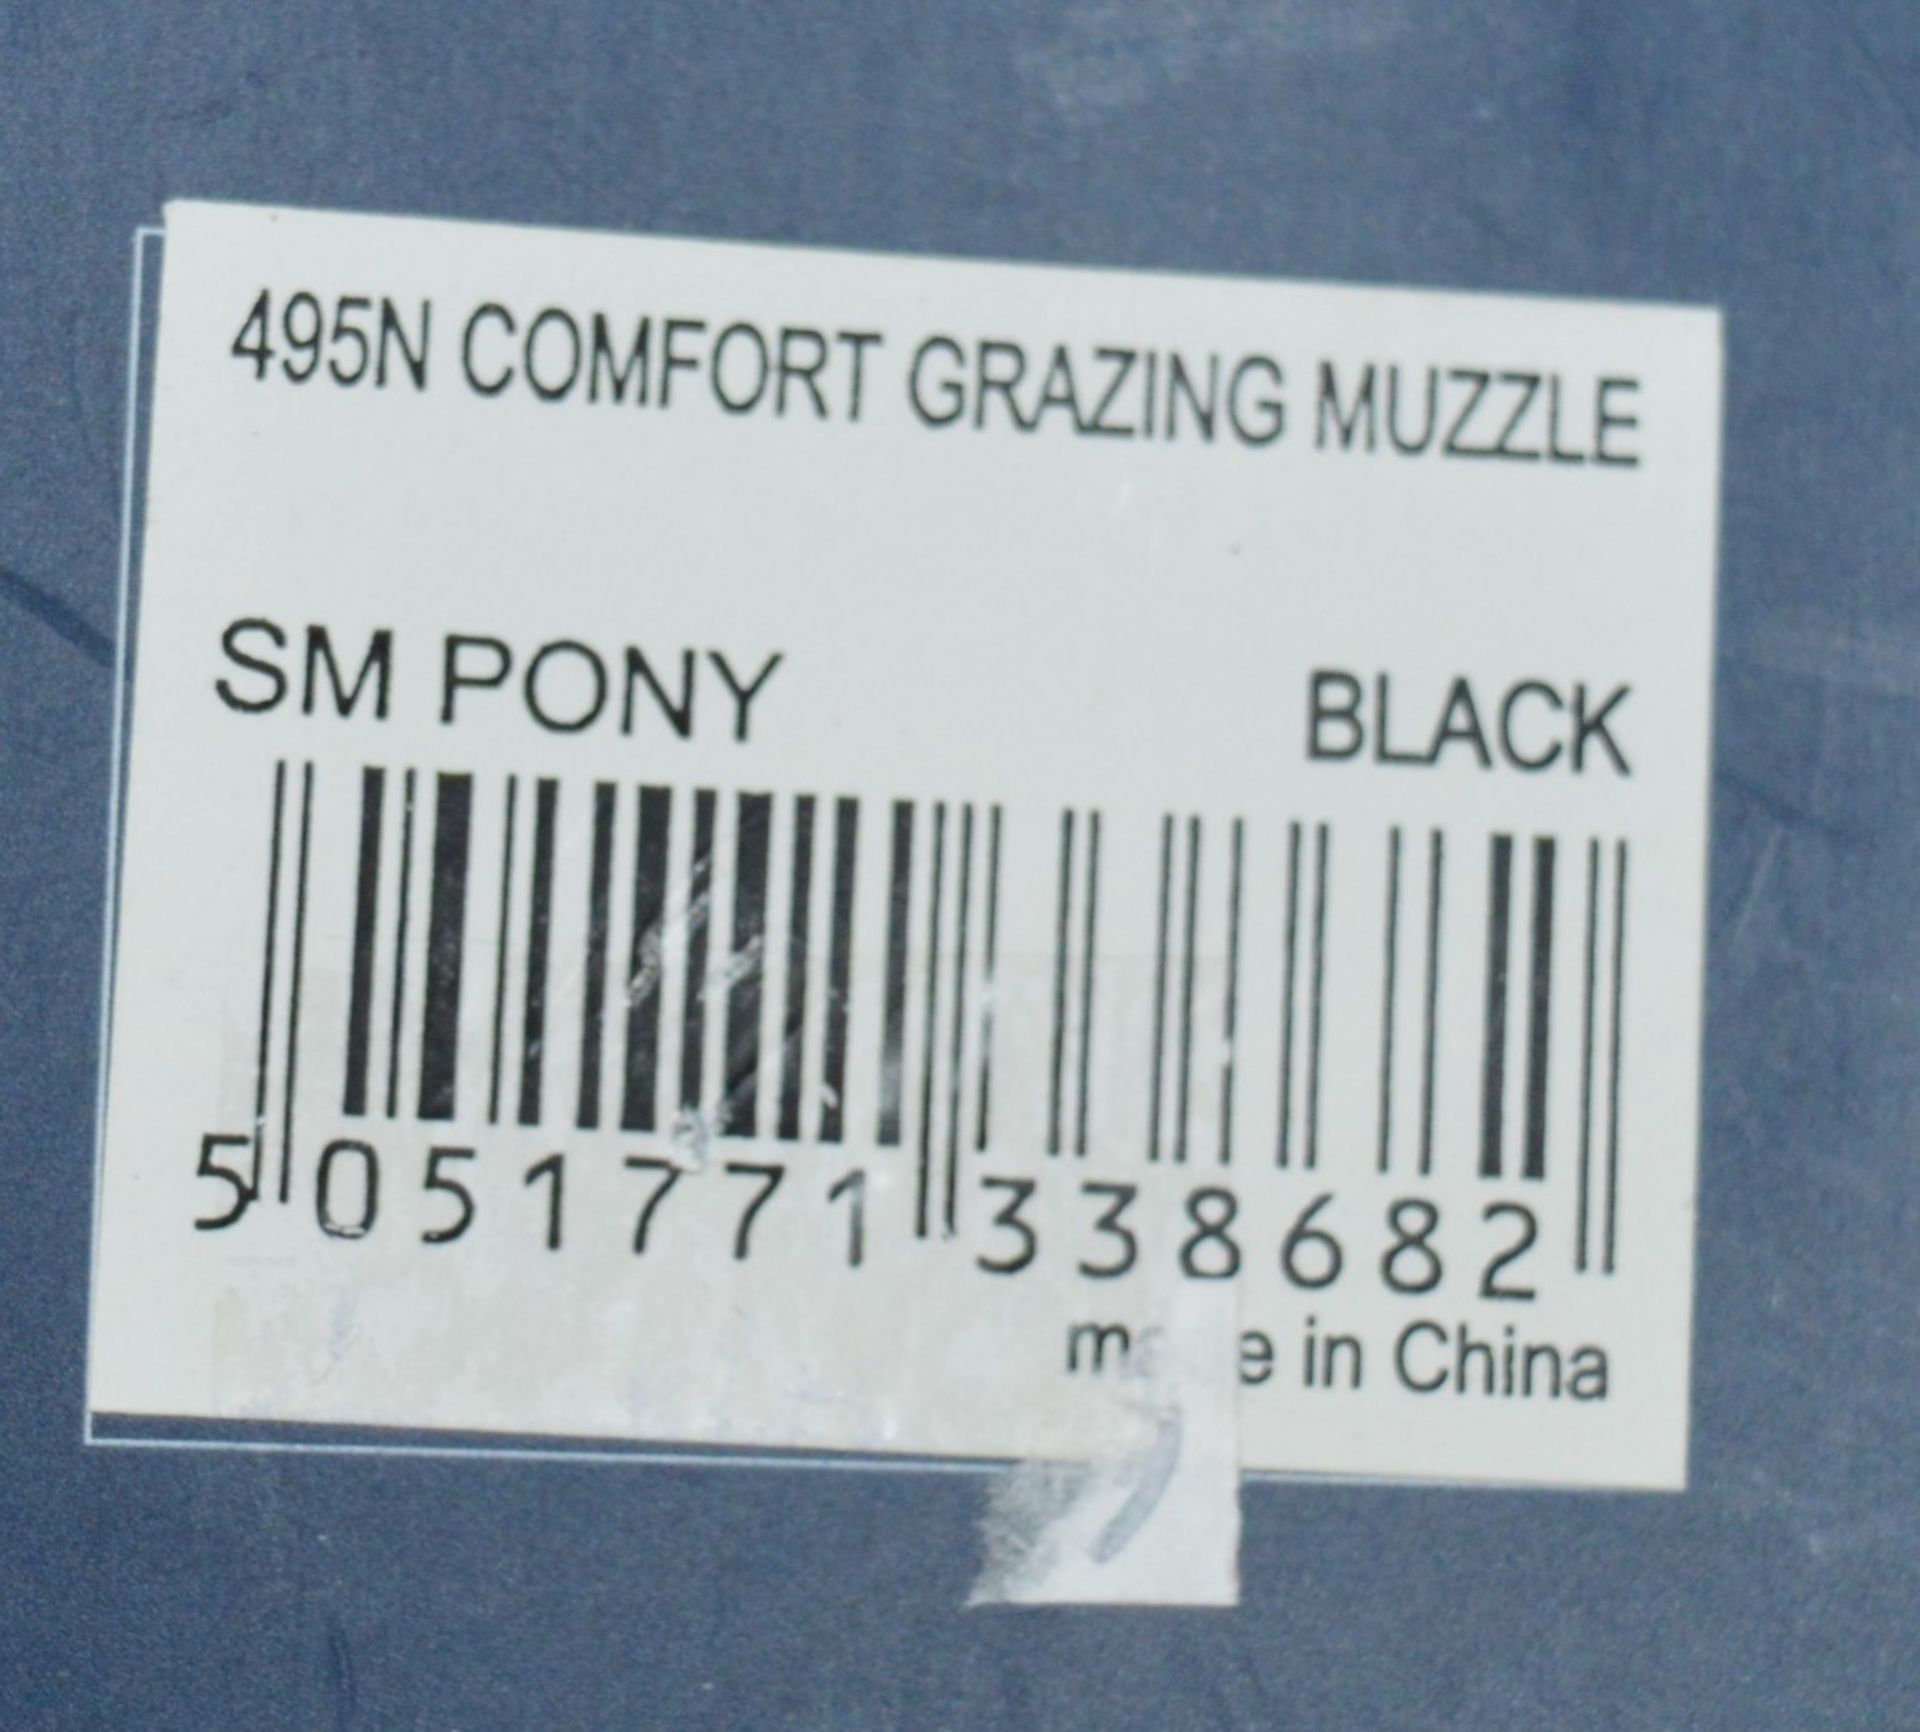 1 x Shires Comfort Grazing Muzzle - Small Pony 495N Black - New Stock - CL401 - Ref J891 - Location: - Image 2 of 3